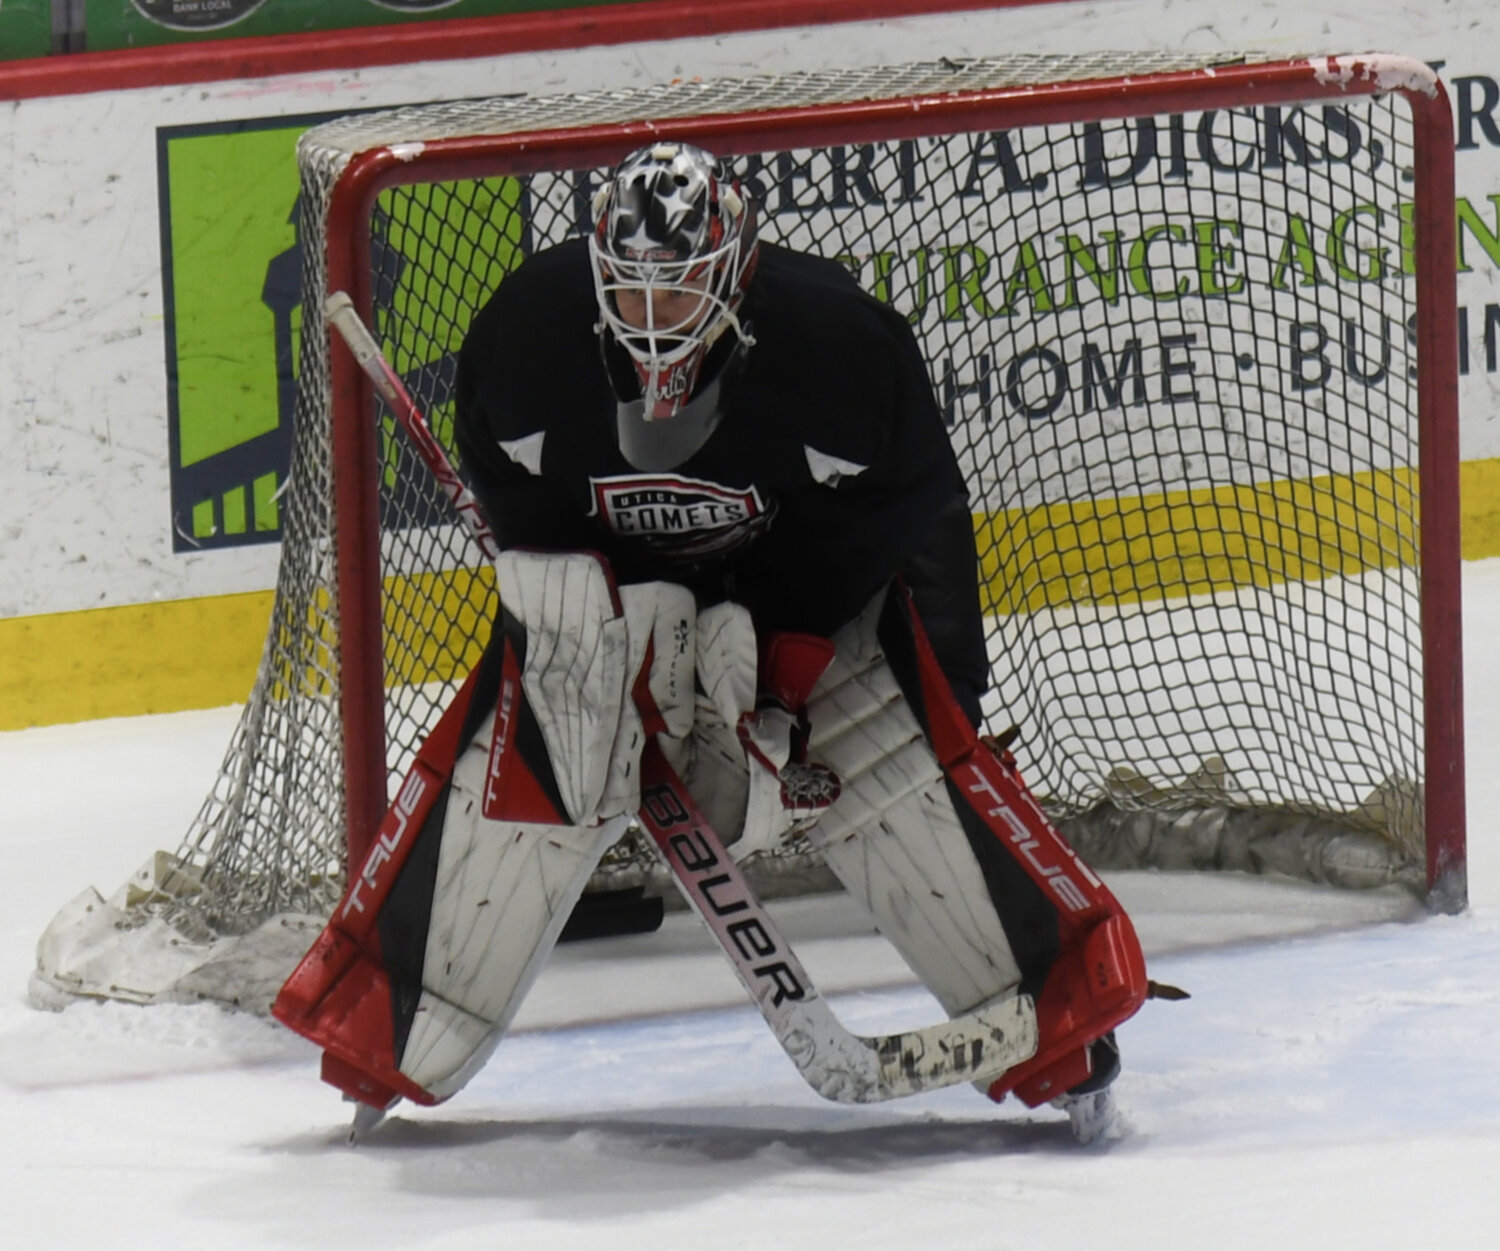 Isaac Poulter looks on during practice Tuesday at the Adirondack Bank Center. The team announced Tuesday Poulter — who has played with the team on an AHL deal this season — is signed to an AHL contract for the 2023-24 season.